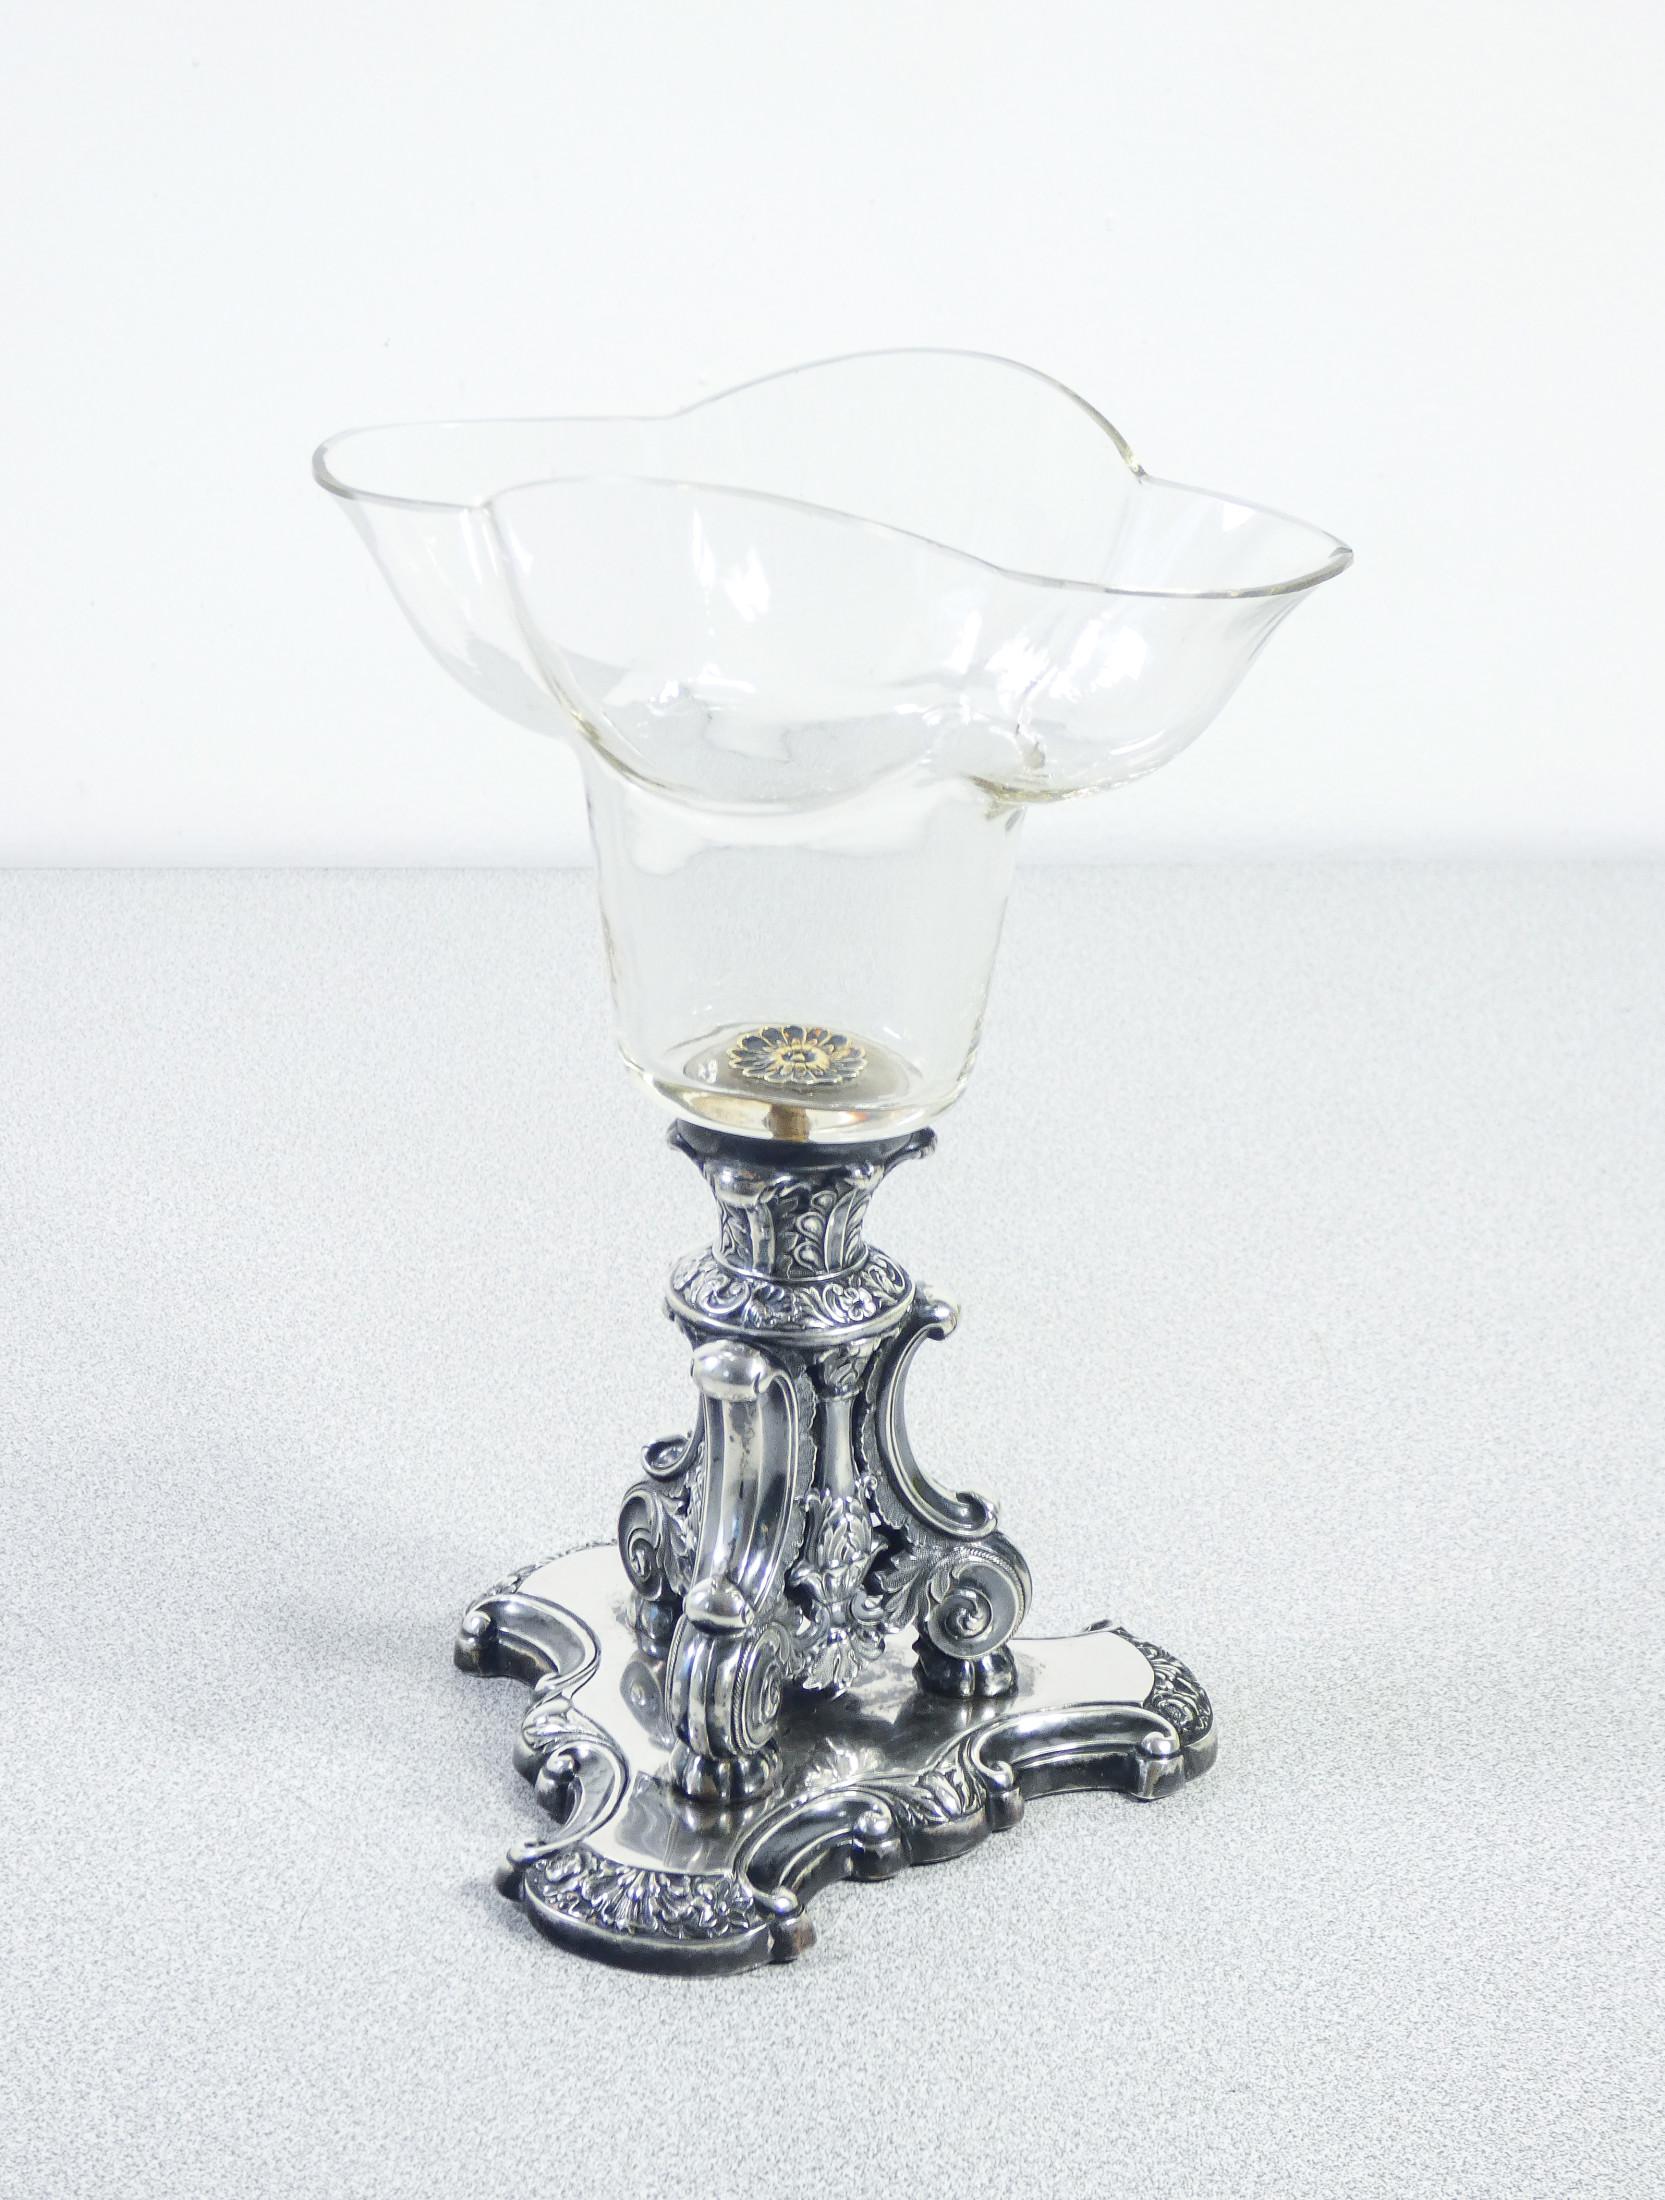 Silver cup
and glass by Johann H.P.
SCHOTT Söhne.

ORIGIN
Germany

PERIOD
1840 ca

AUTHOR
Silversmith Johann H.P.
SCHOTT Söhne

MODEL
Cup, vase

MATERIALS
Silver and glass

DIMENSIONS
Height: 22.5cm
Width: 16.2cm
Depth (Ø base): 12